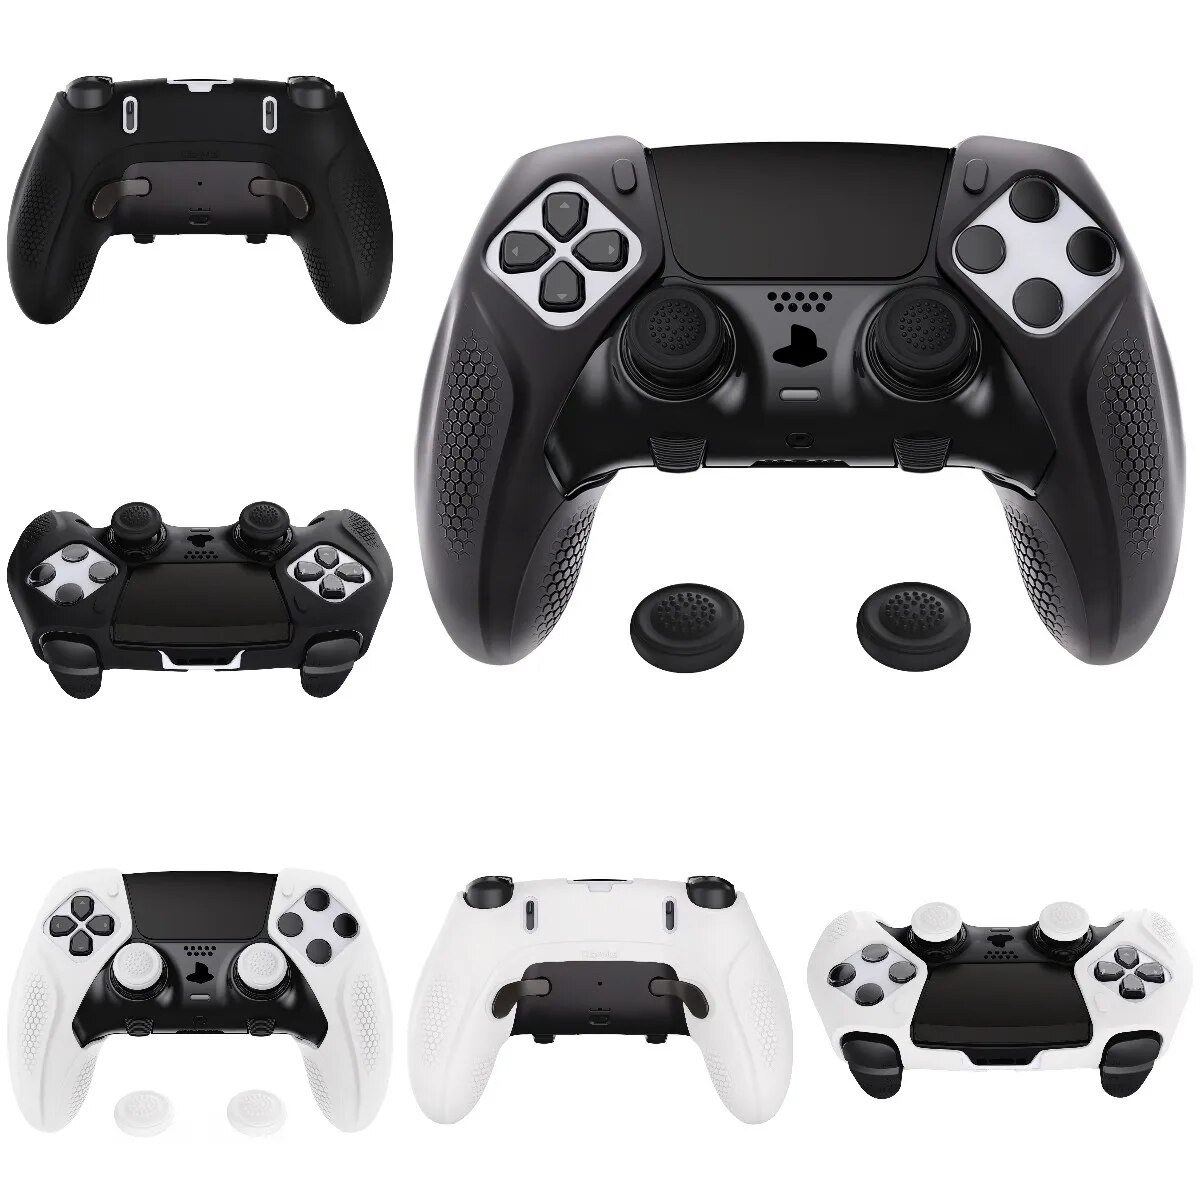 【Flash sale】 Playvital Ninja Edition Anti-Slip Half-Covered Silicone Cover Skin For Ps5 Edge Controller Soft Protector - Black